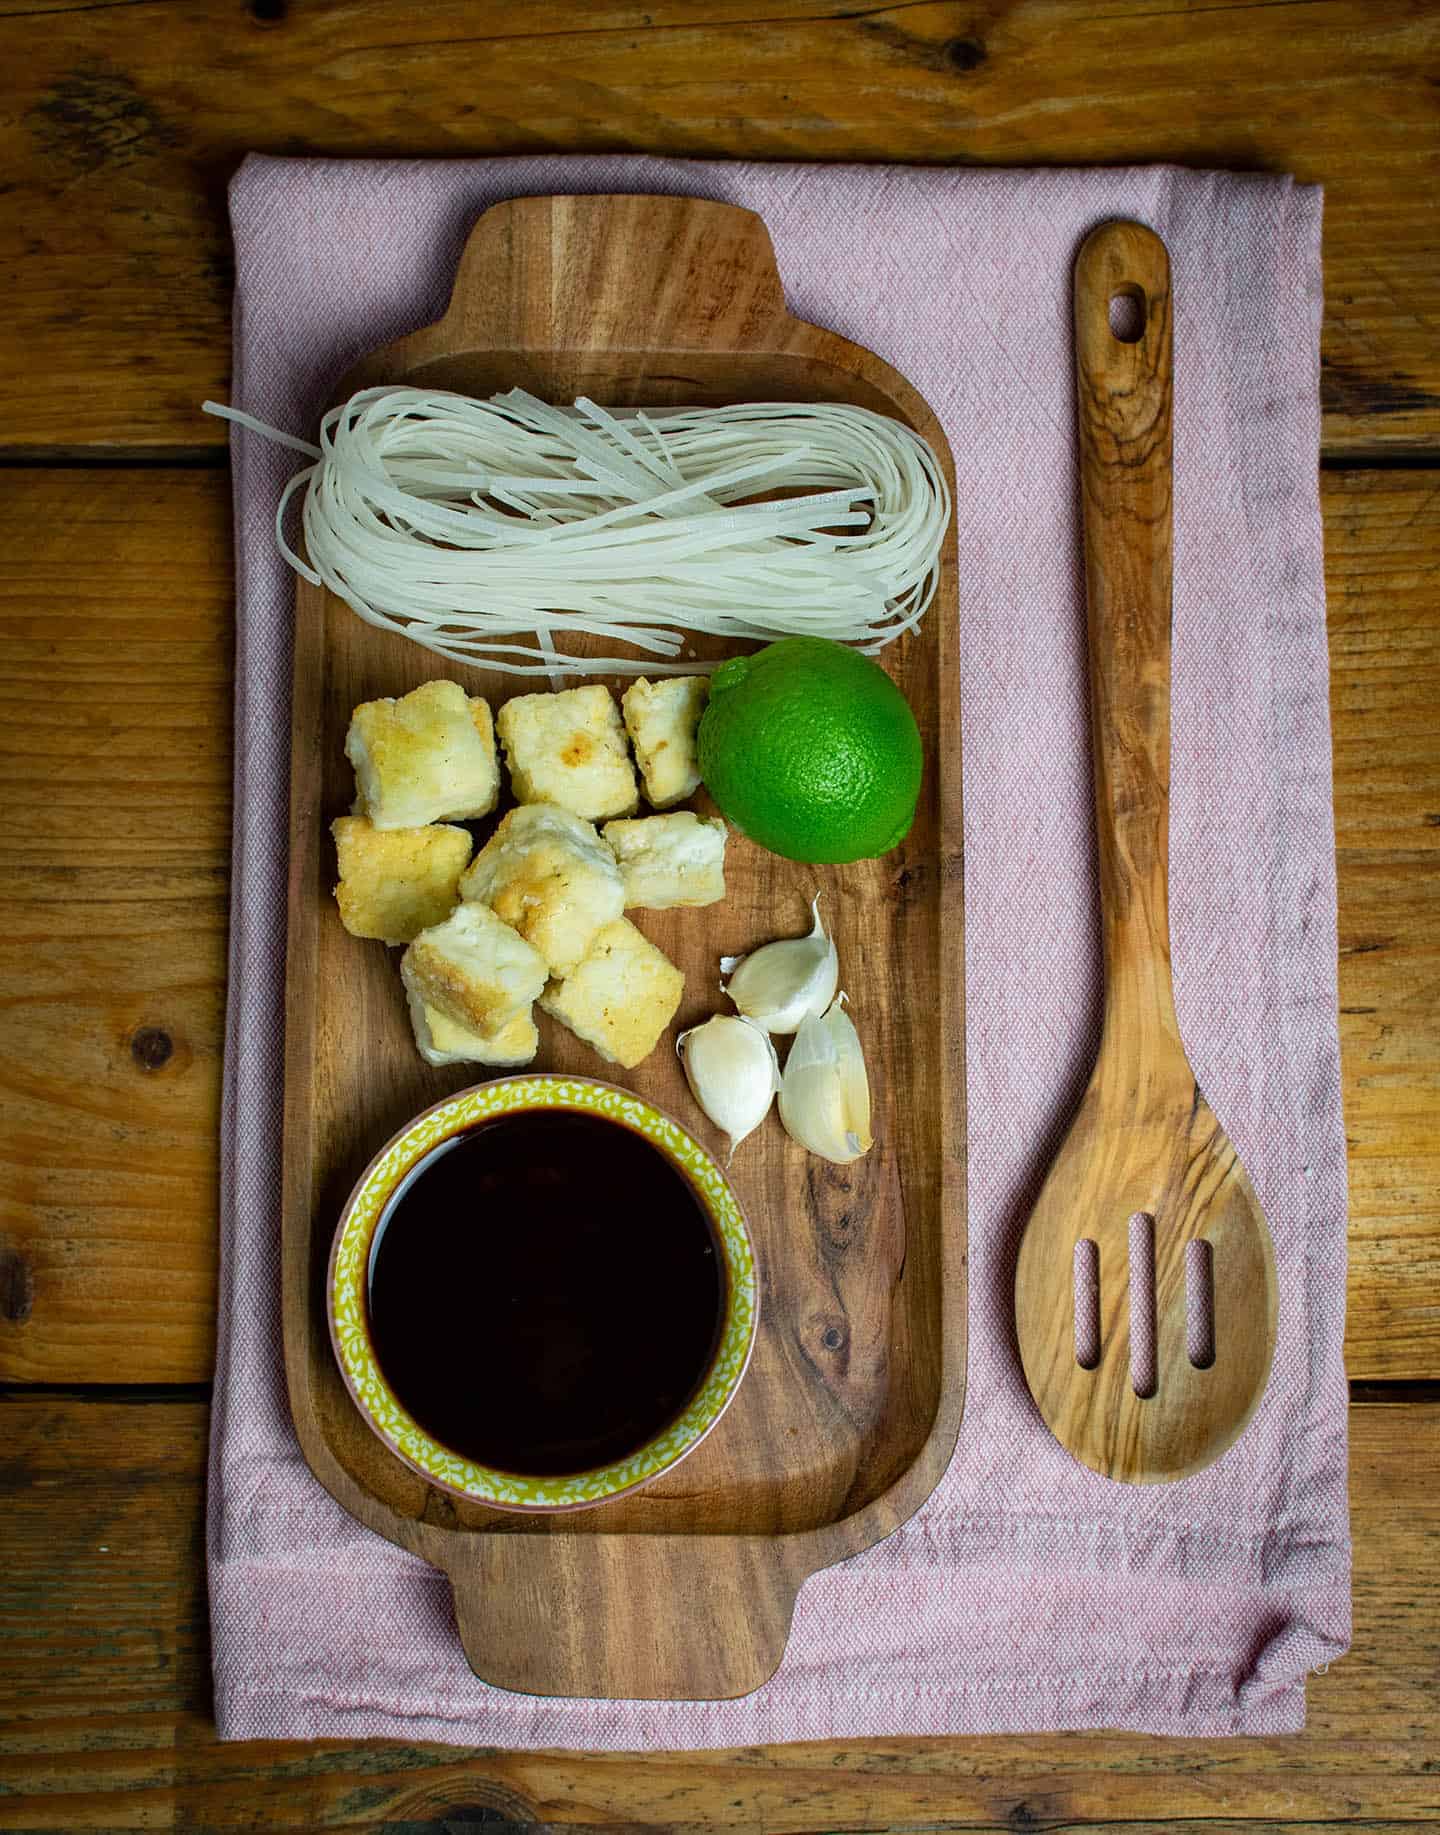 Ingredient laid out on a wooden board. Featuring noodles, tofu, lime and soy sauce.